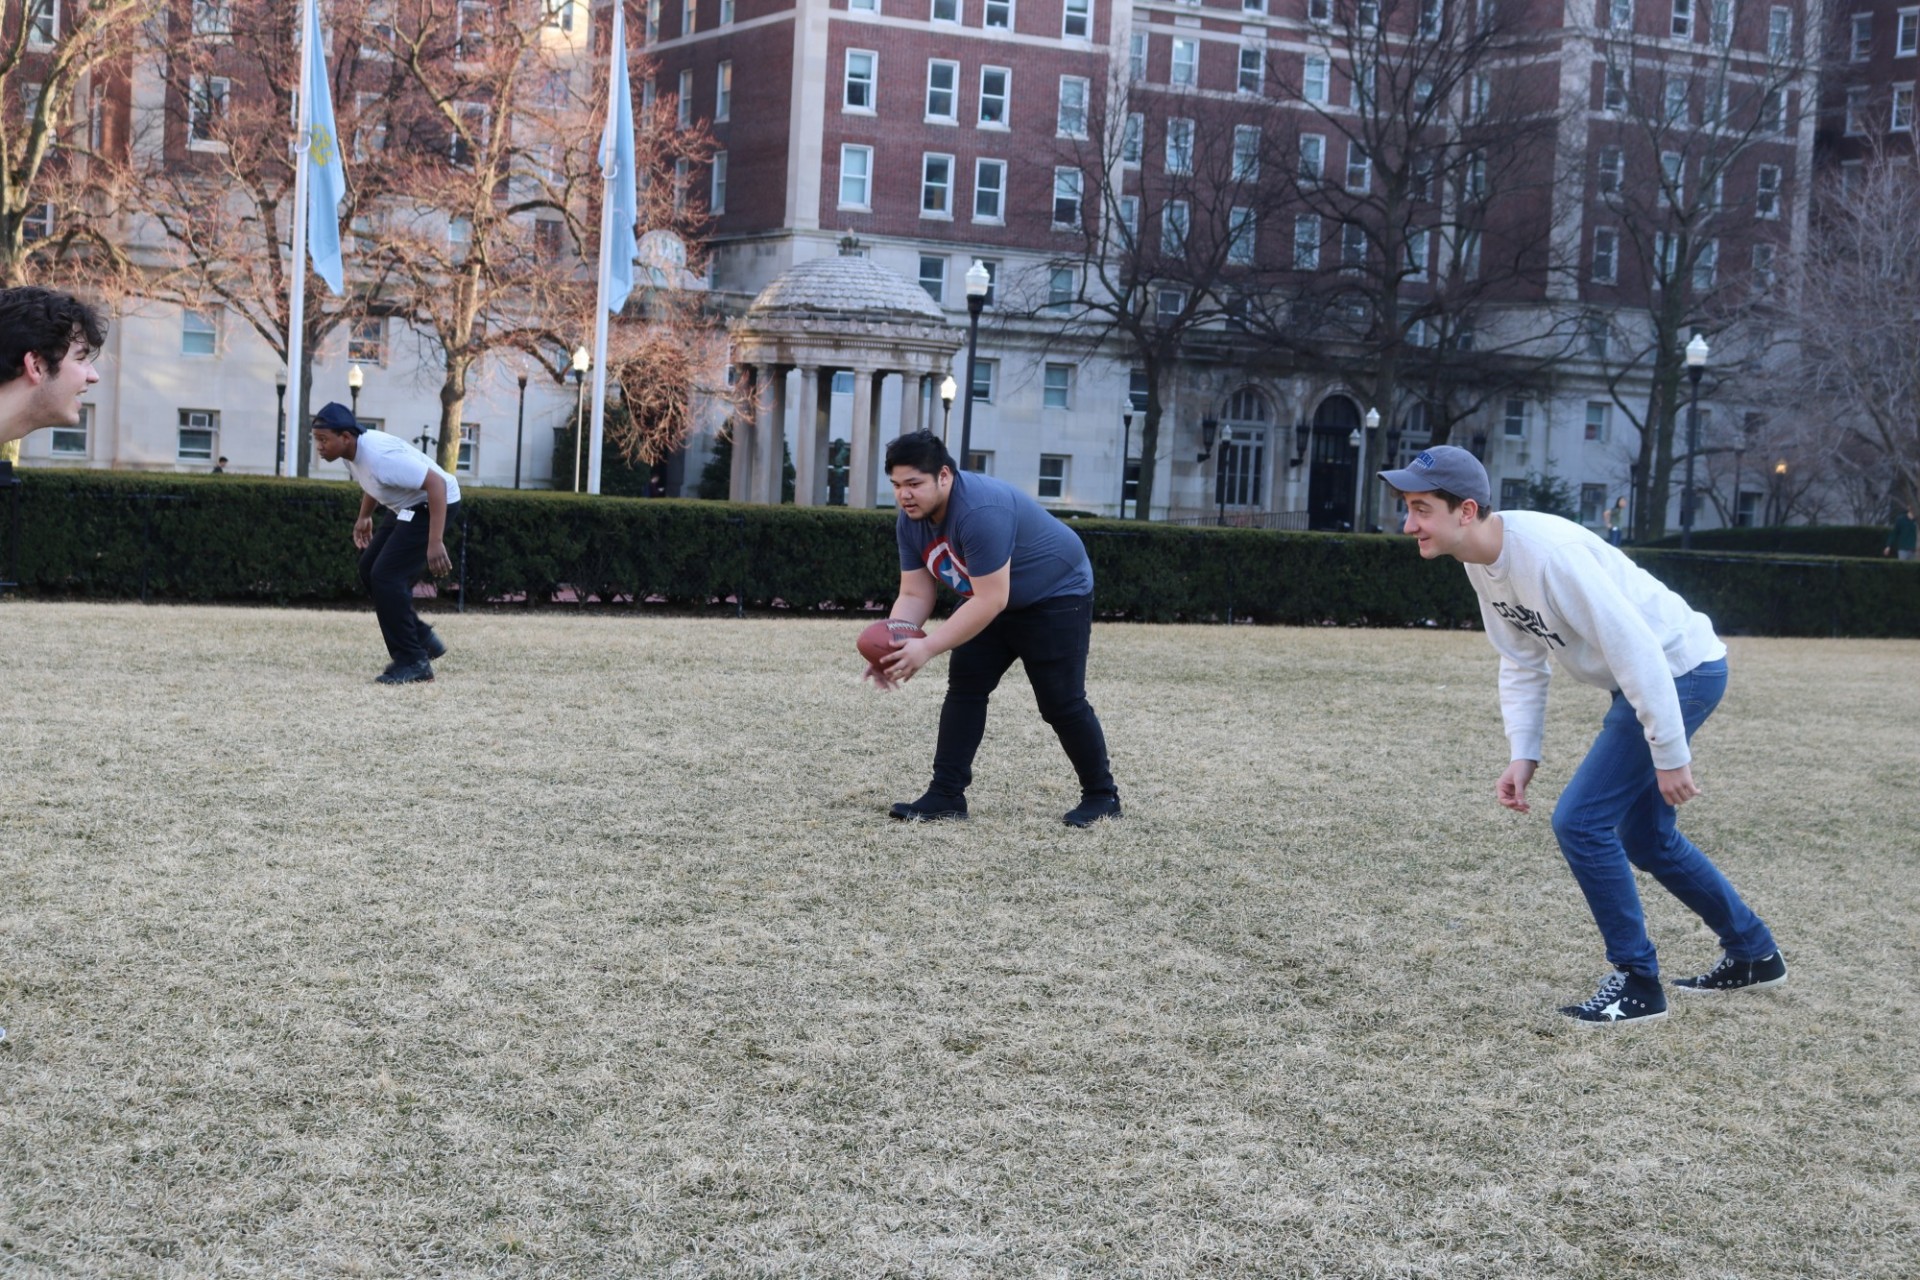 Students playing football on the South Field Lawn during January